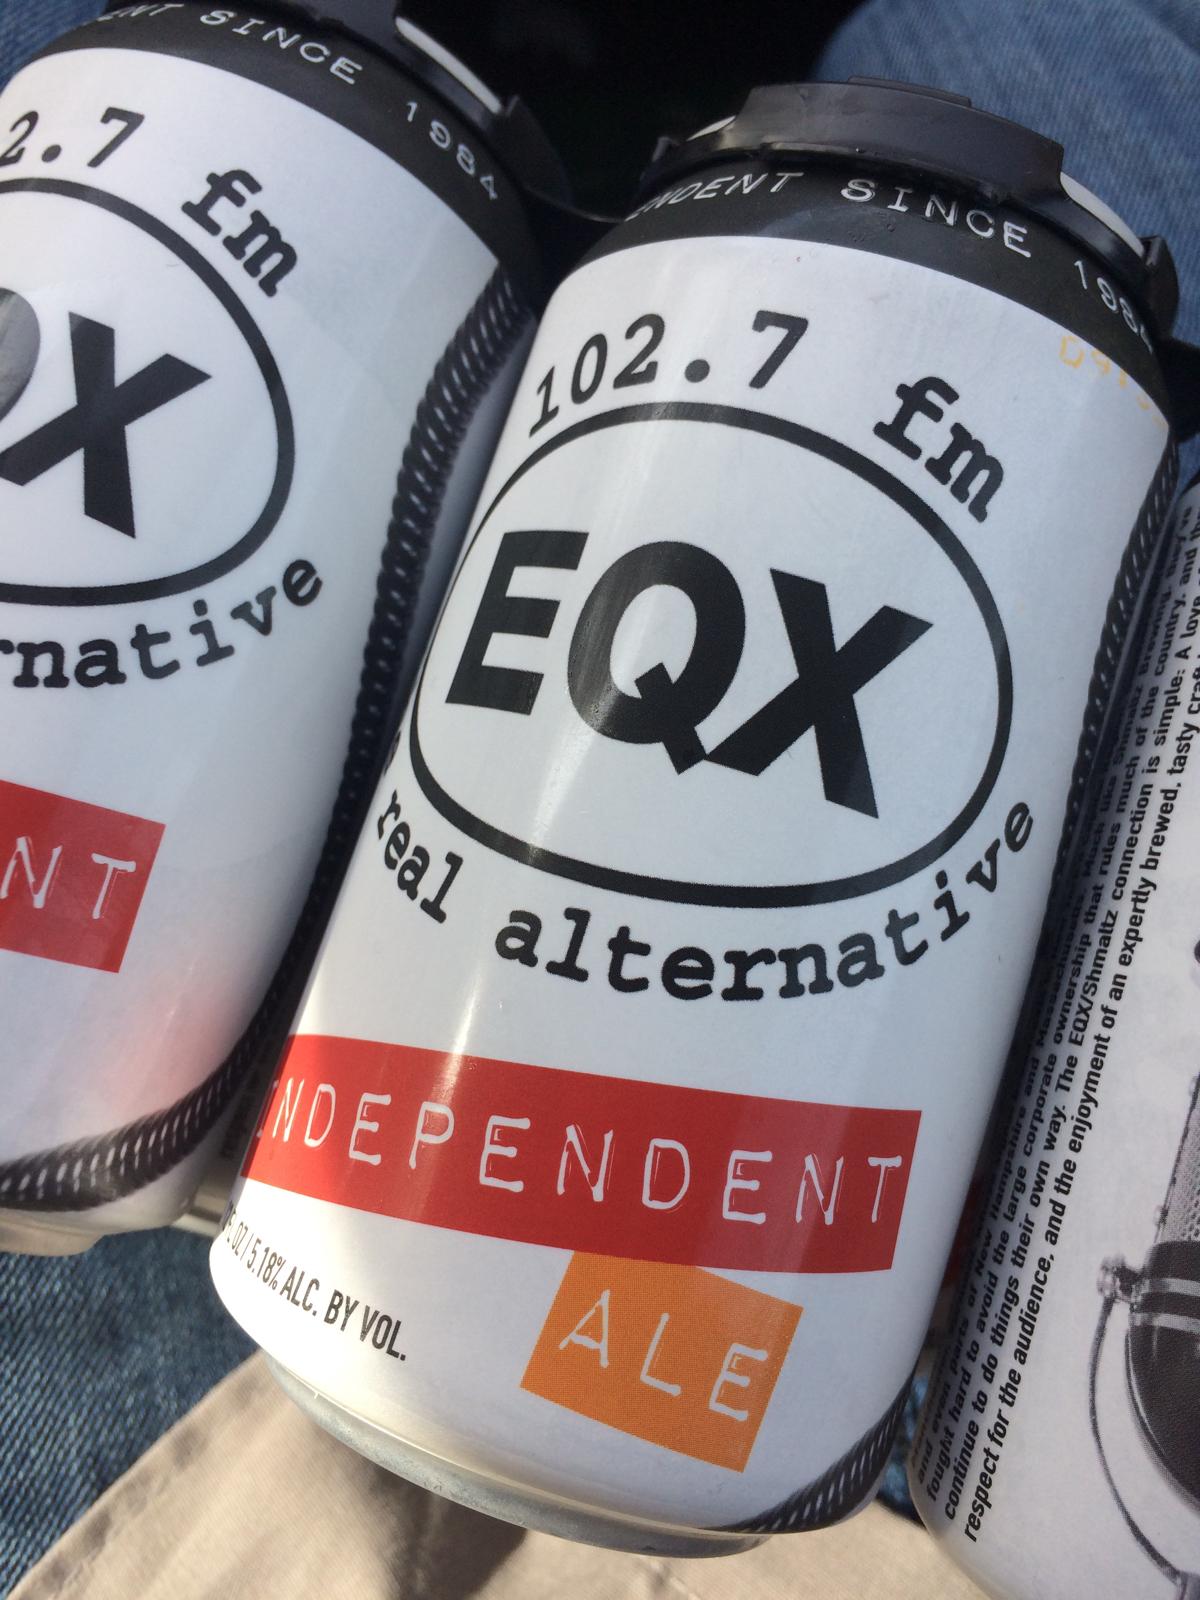 EQX Independent Ale